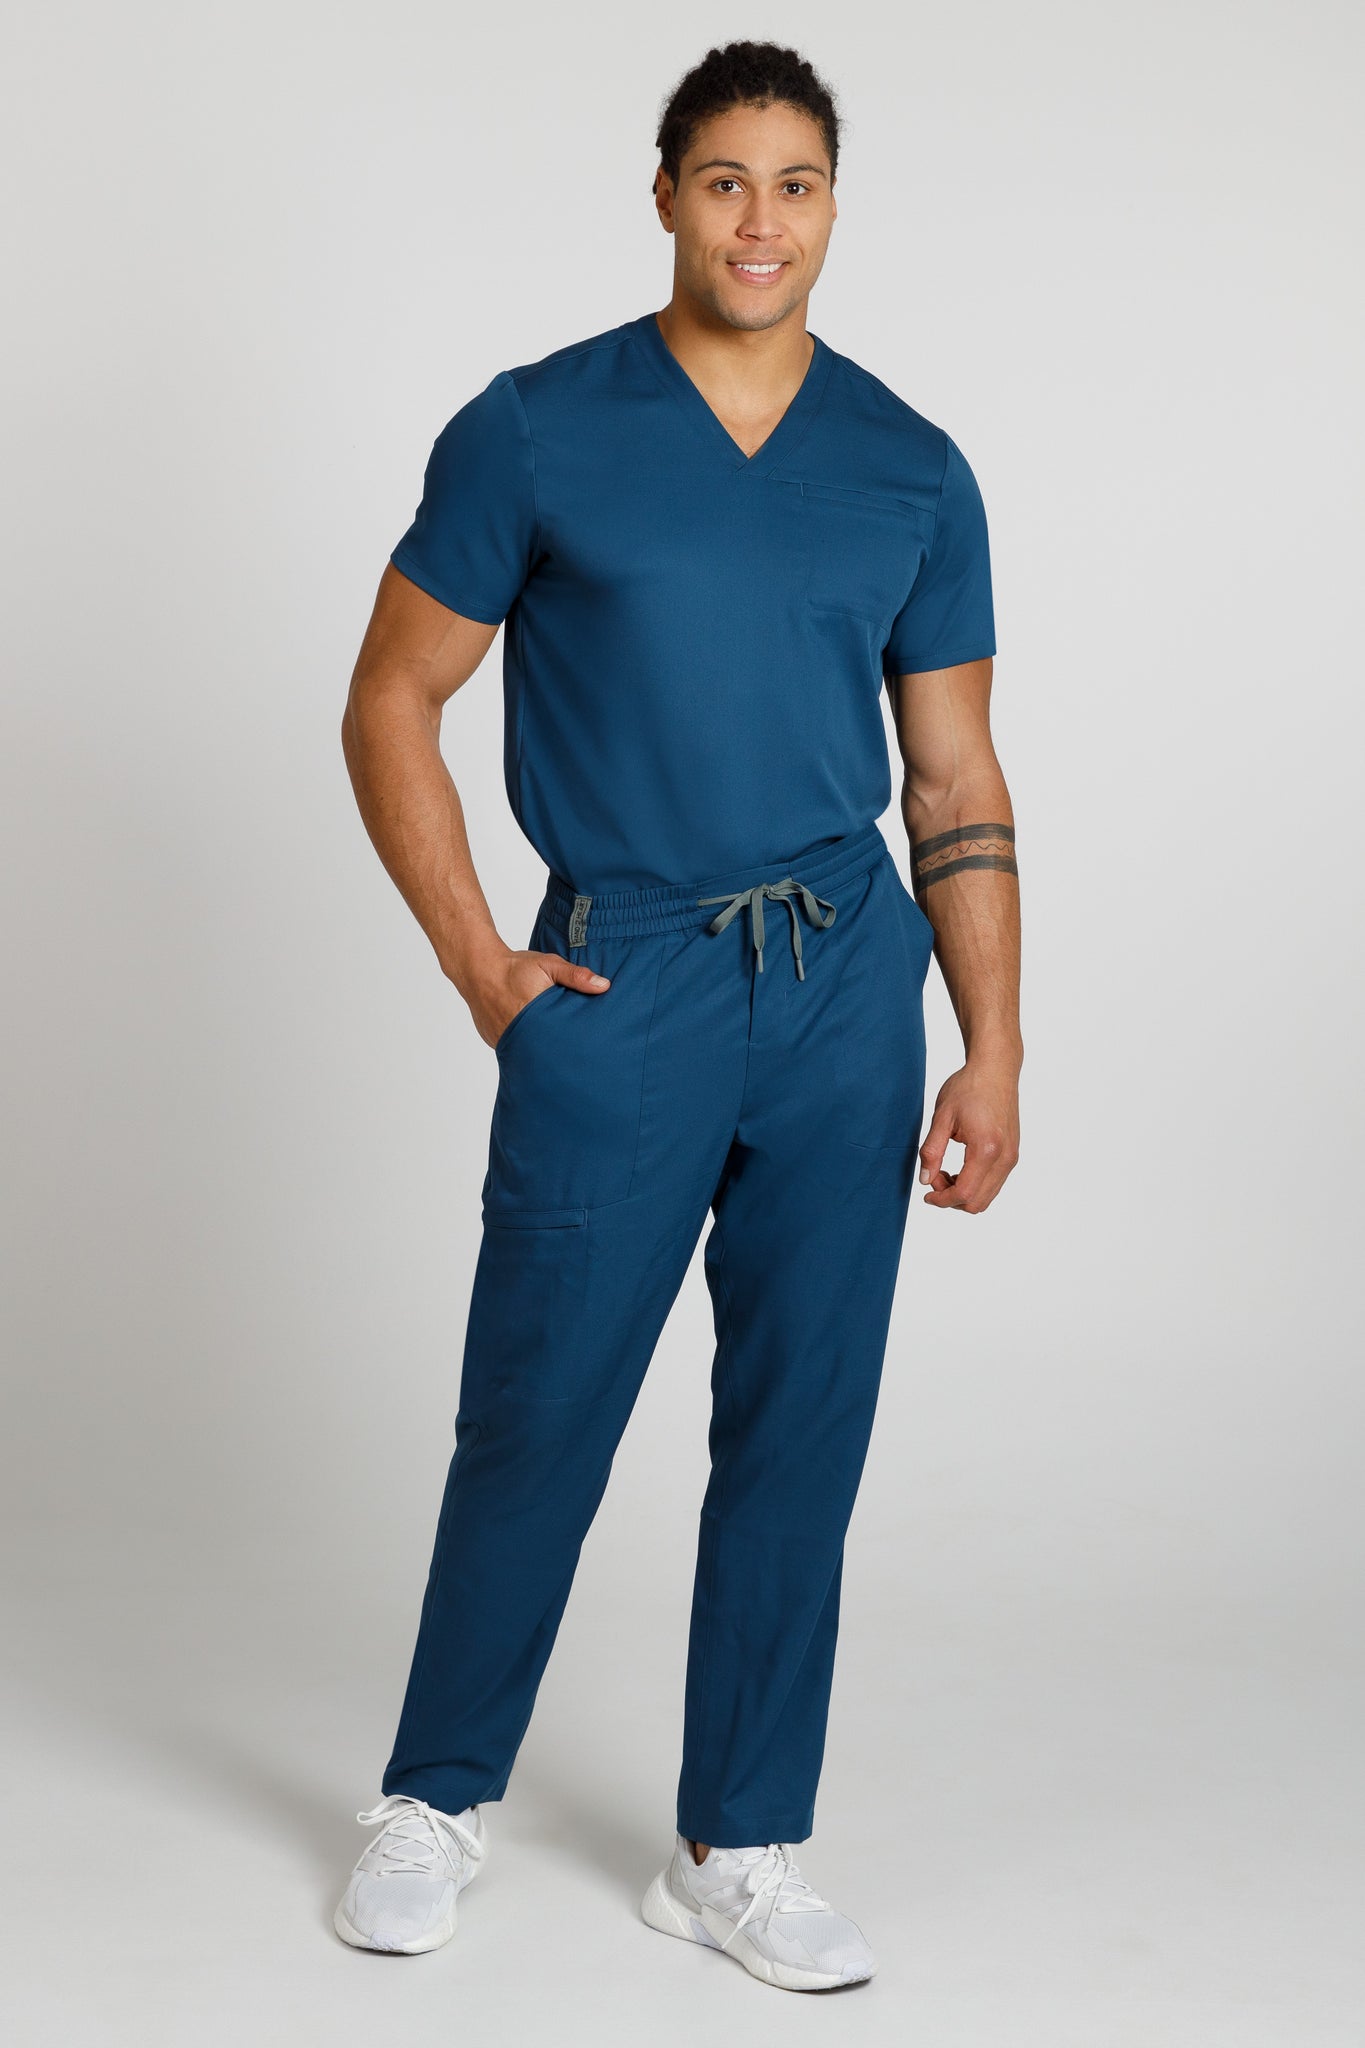 The Outback Cargo Scrub Pants - Gemstone Teal